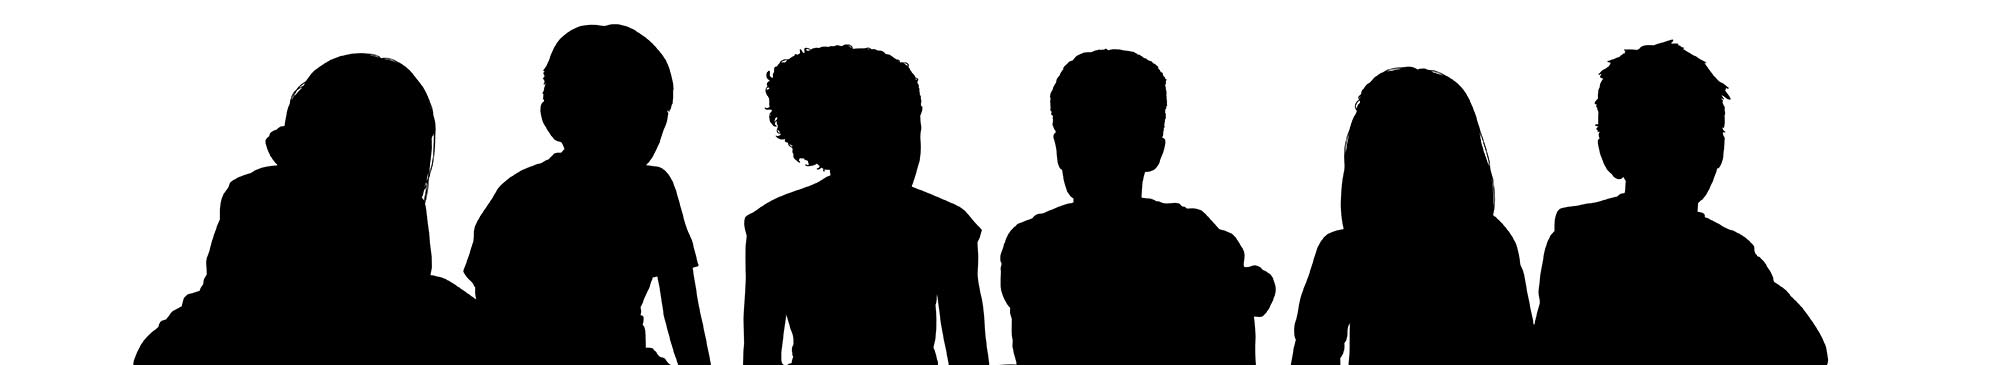 Silhouettes of seated children